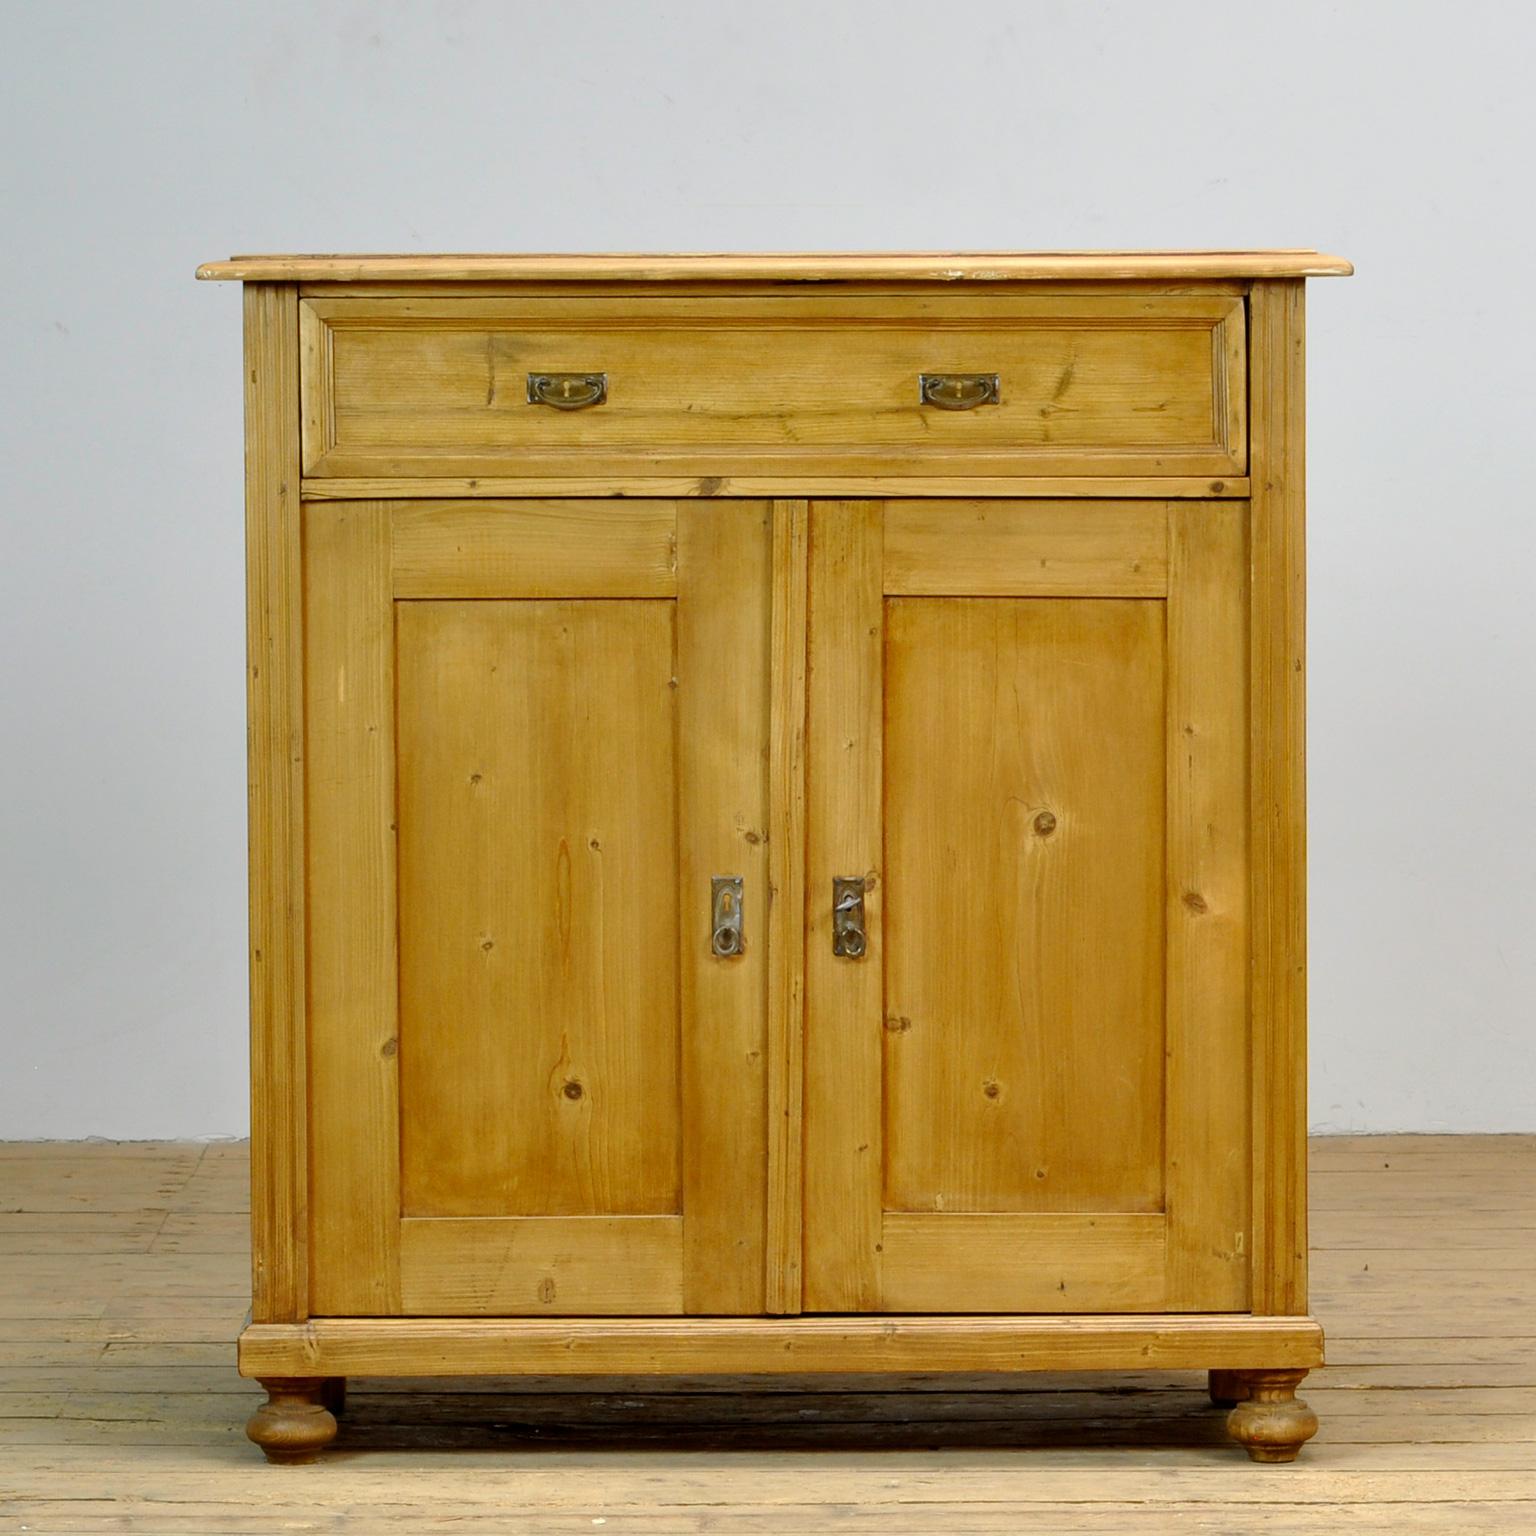 Dresser made of pine. Produced in the 1930s. With a drawer and a shelf inside.